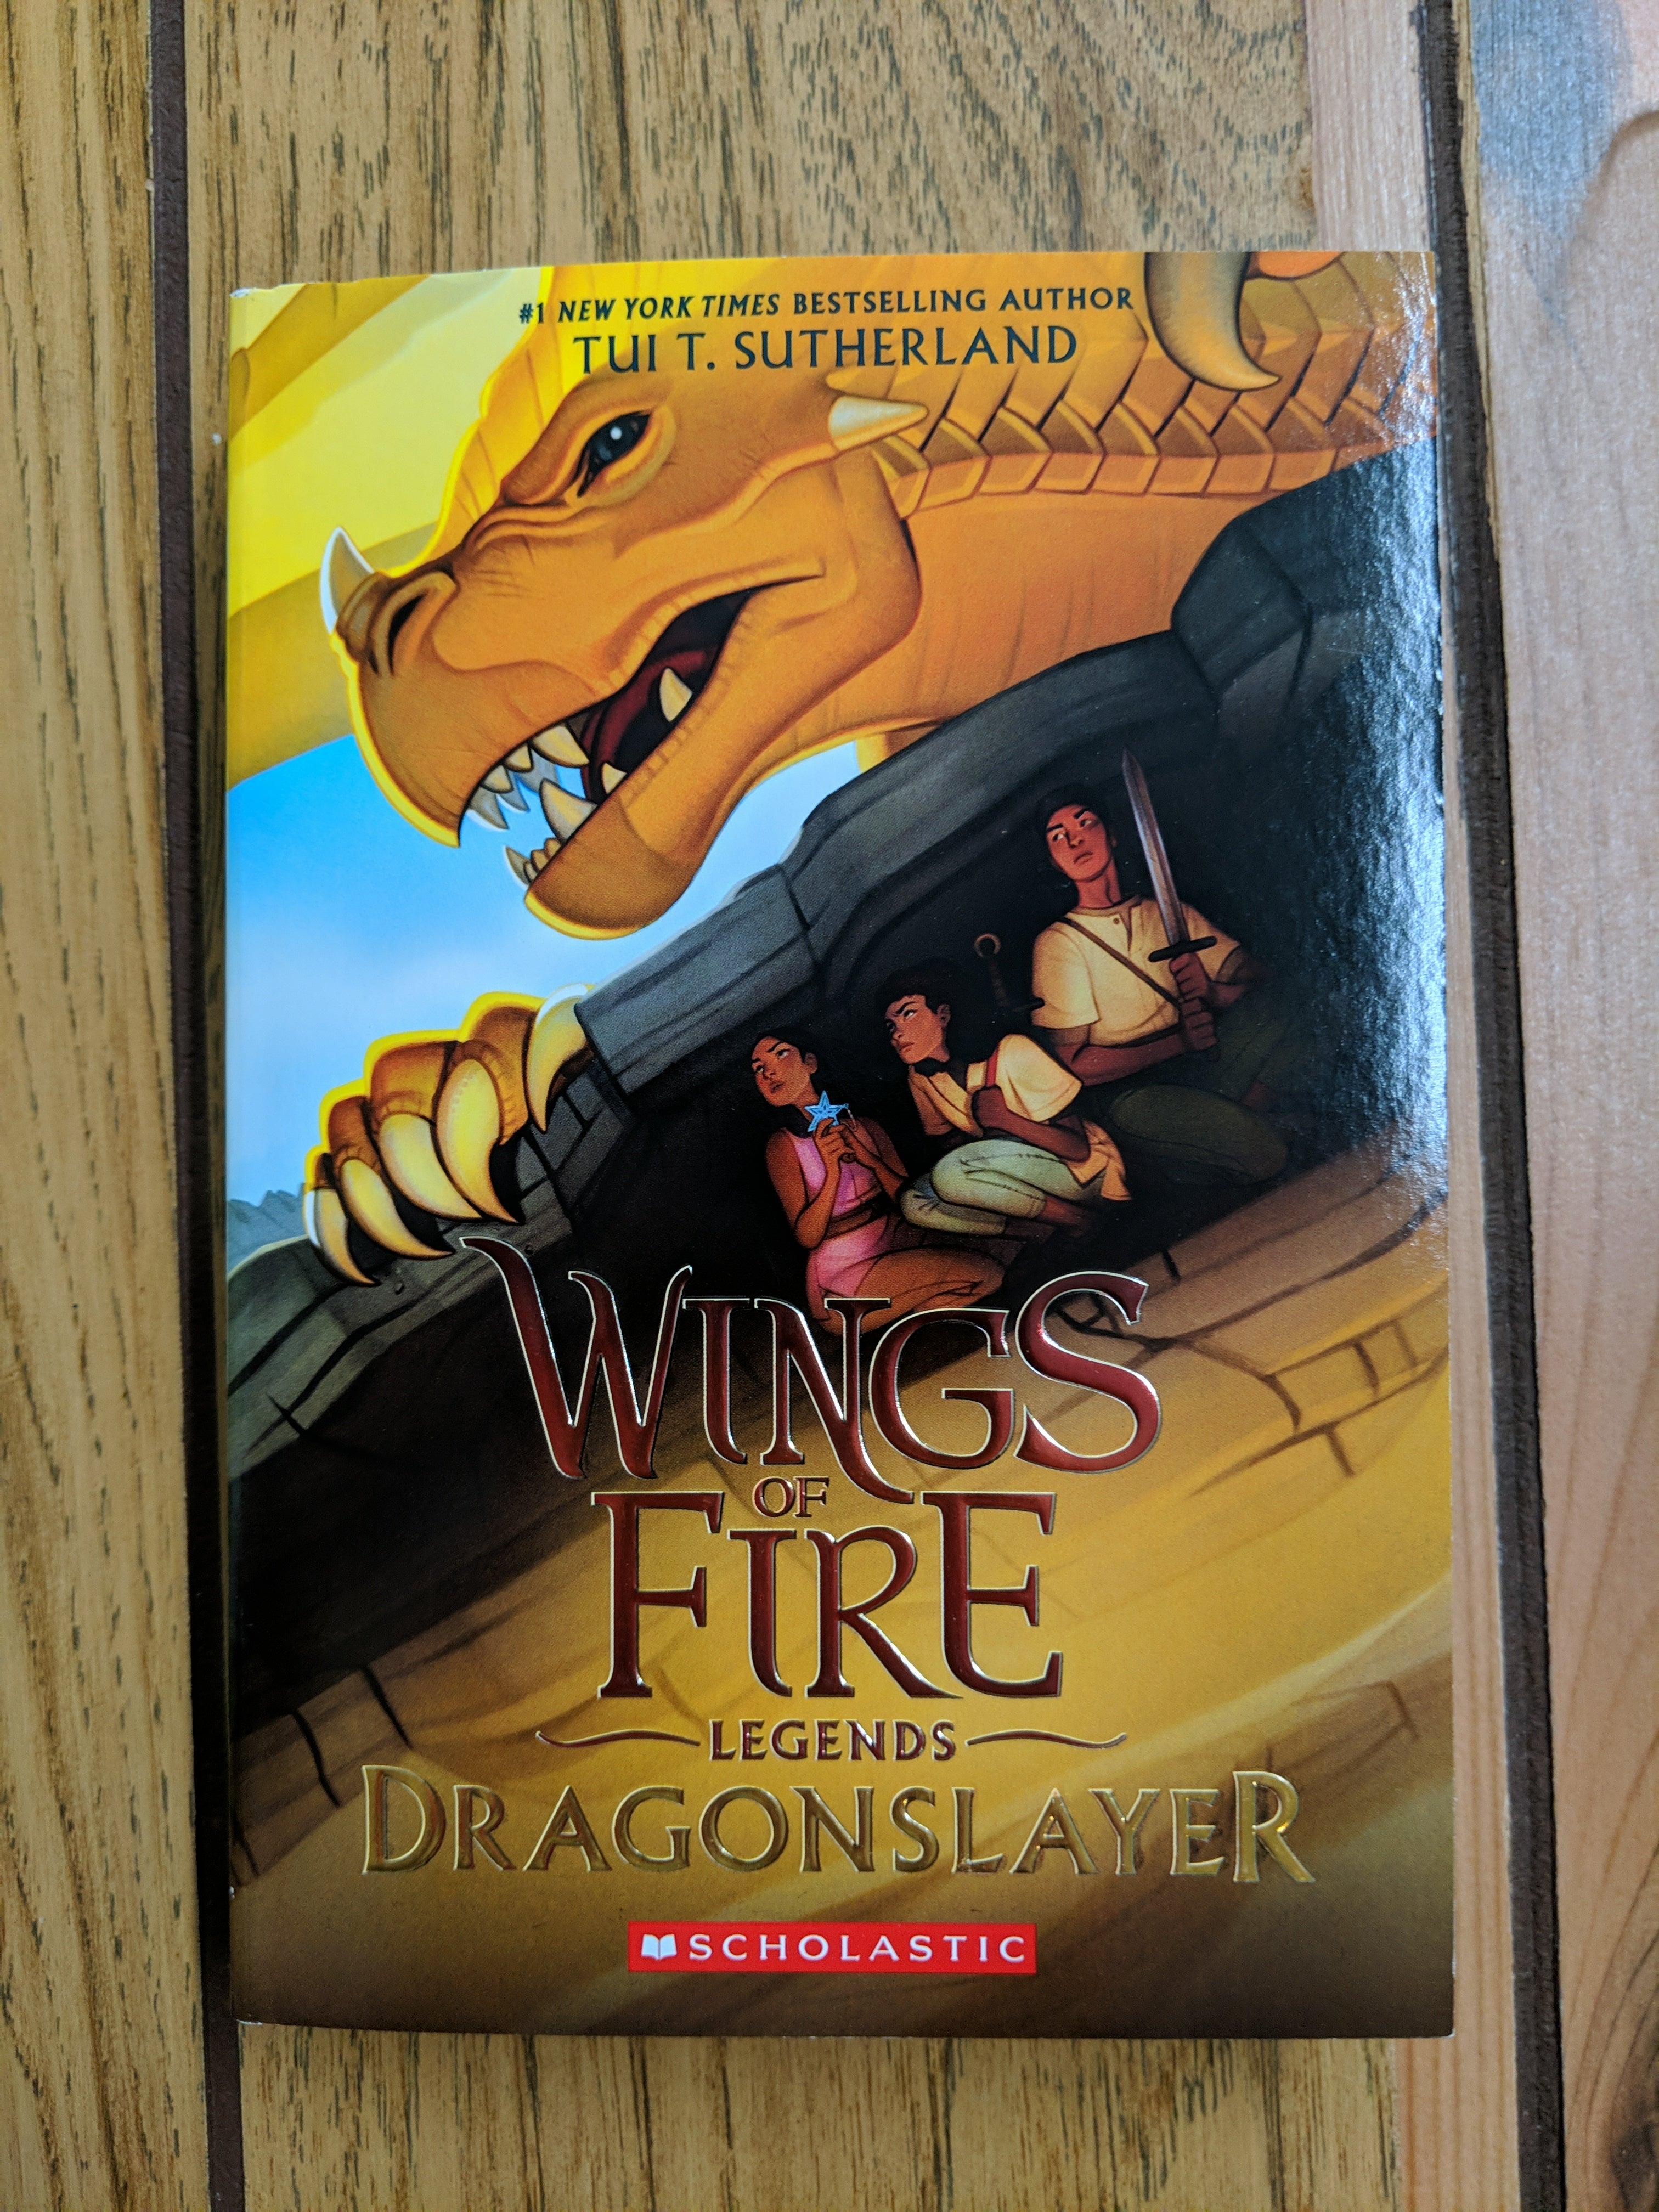 Dragonslayer　Lucky's　and　Comics　Fire　Books　Legends:　–　Wings　of